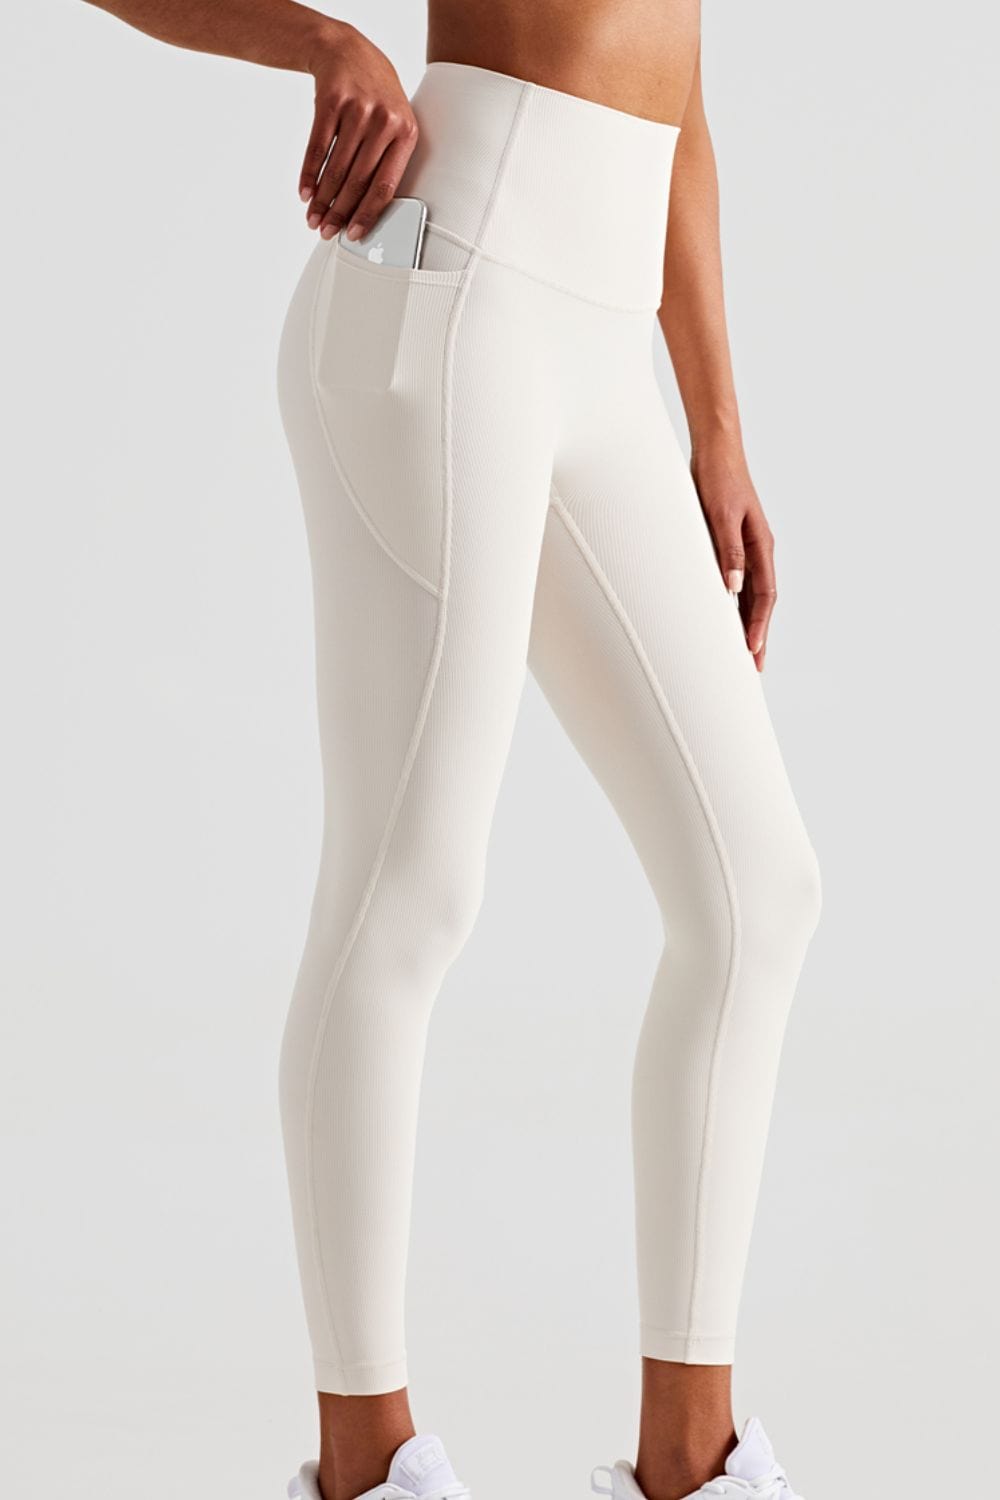 Soft and Breathable High-Waisted Yoga Leggings - Runway Frenzy 